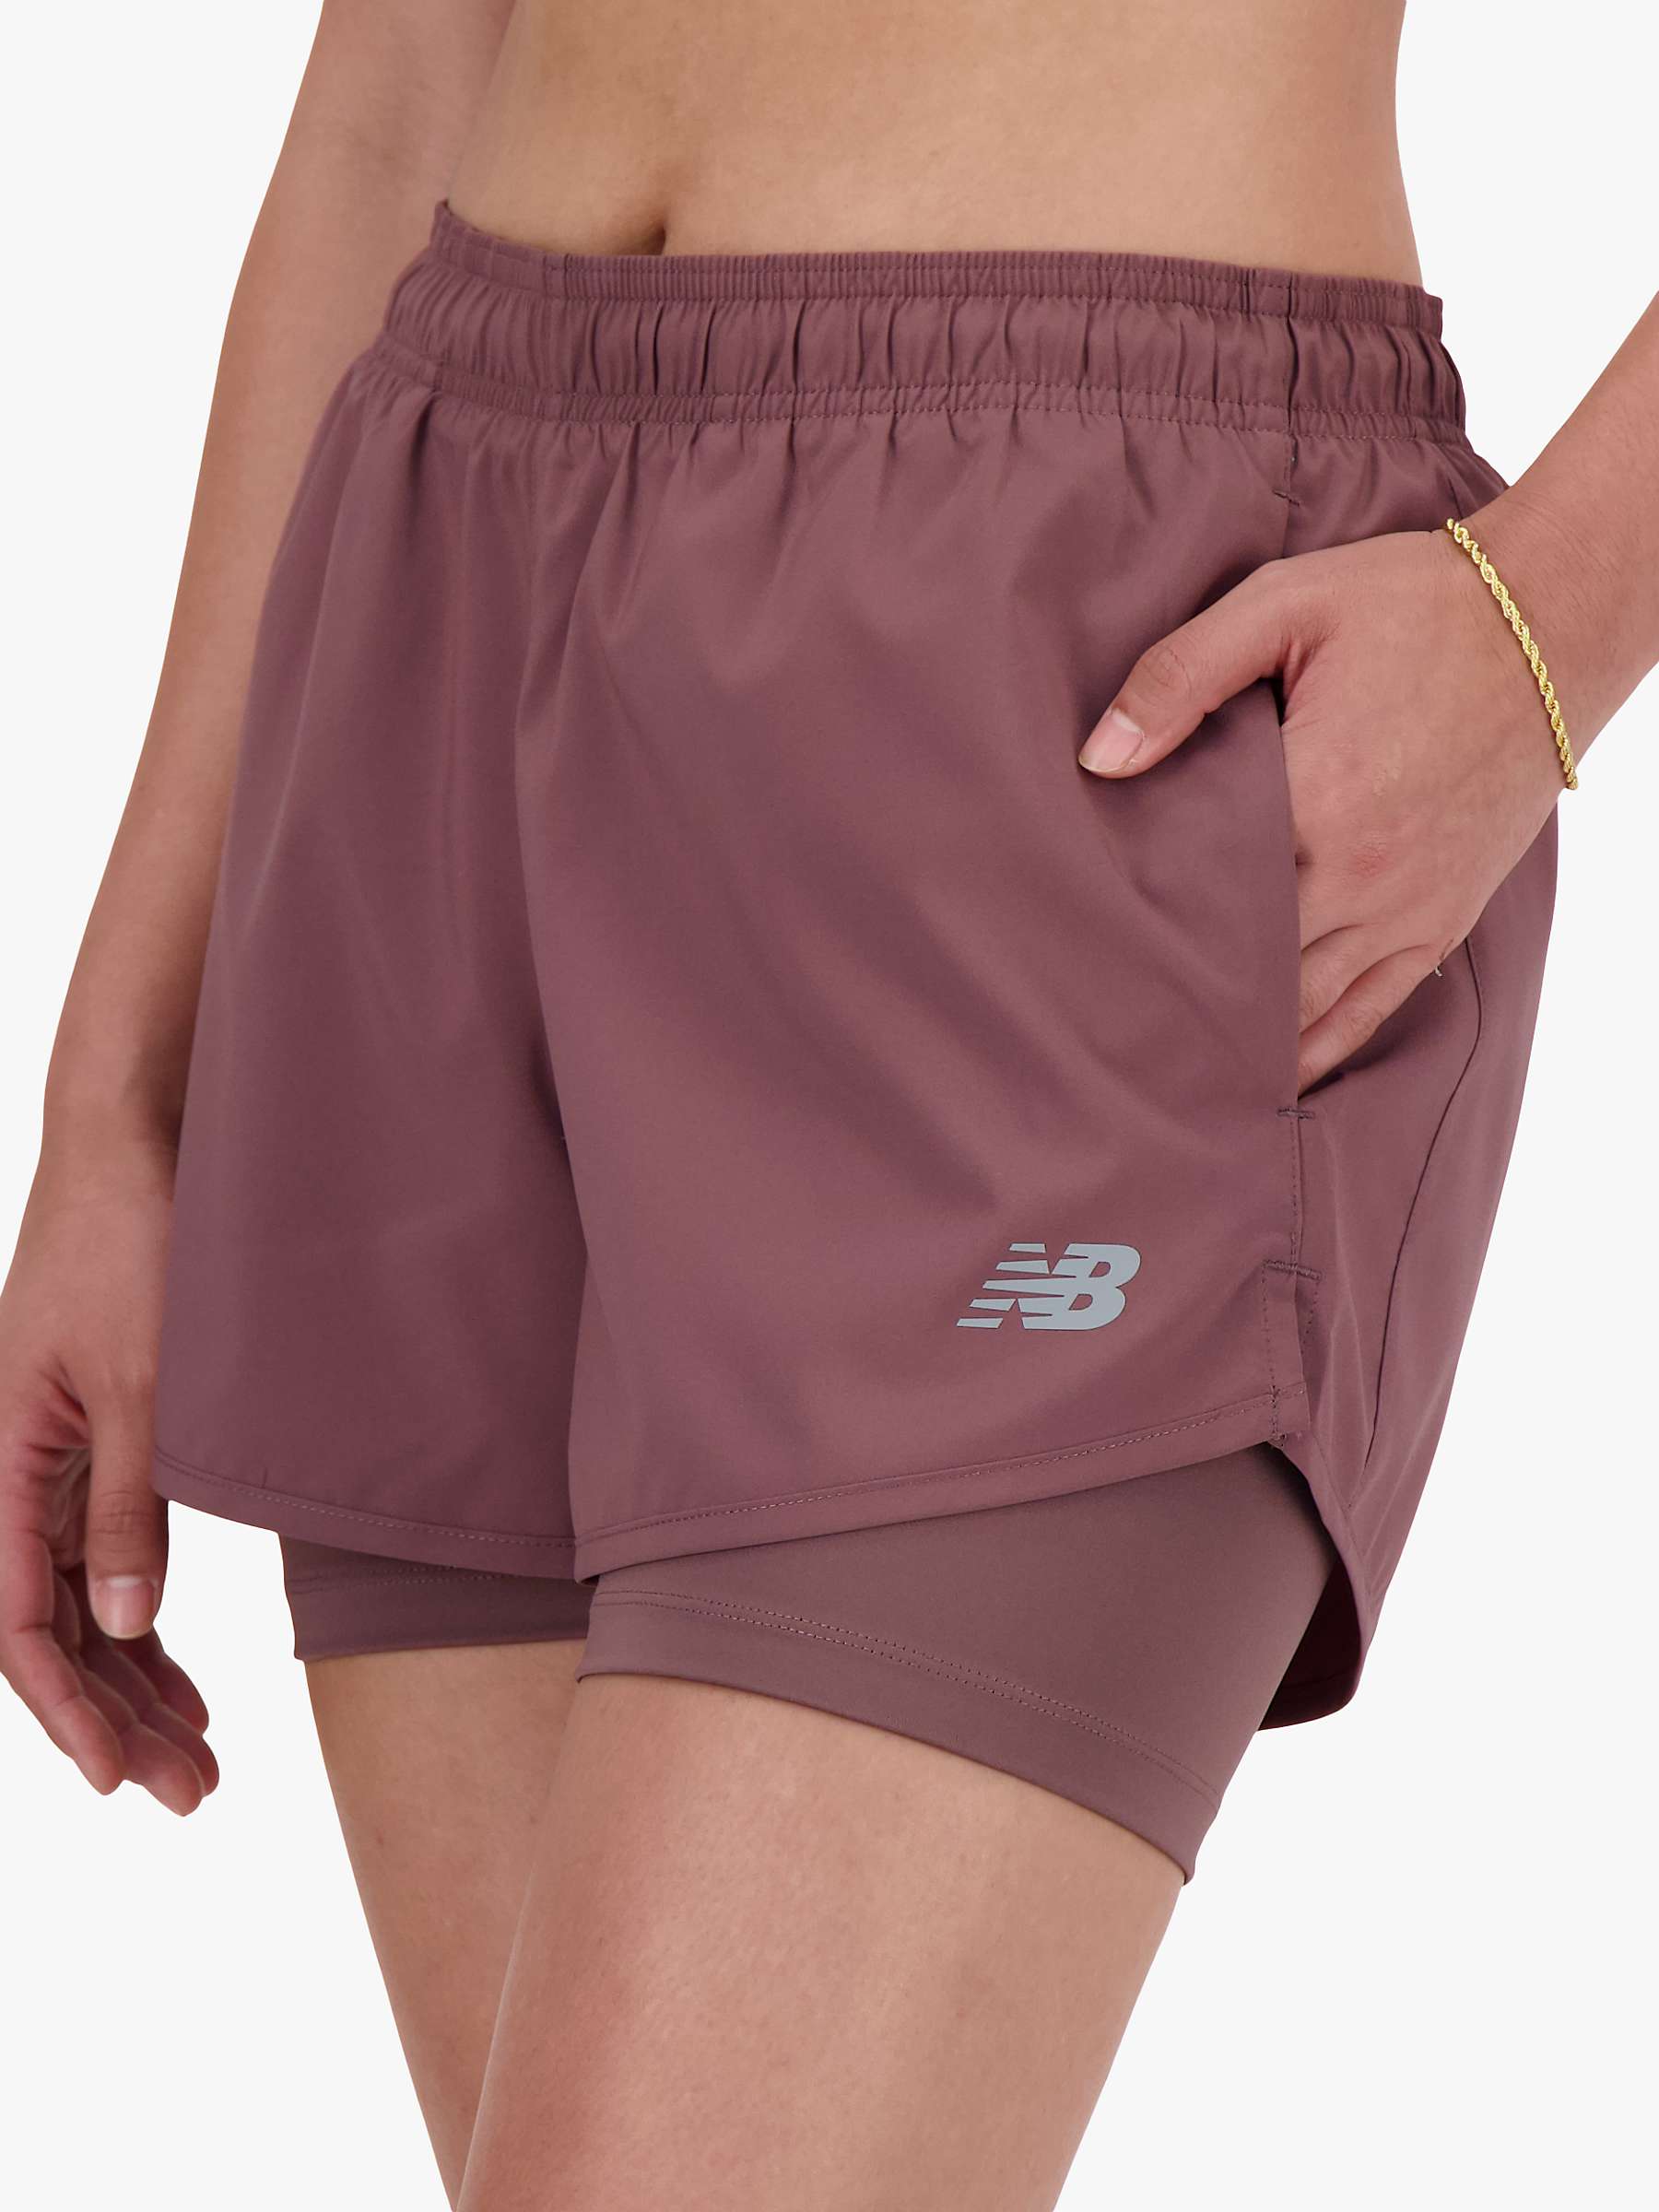 Buy New Balance Women's 2-in-1 Shorts, Licorice Online at johnlewis.com